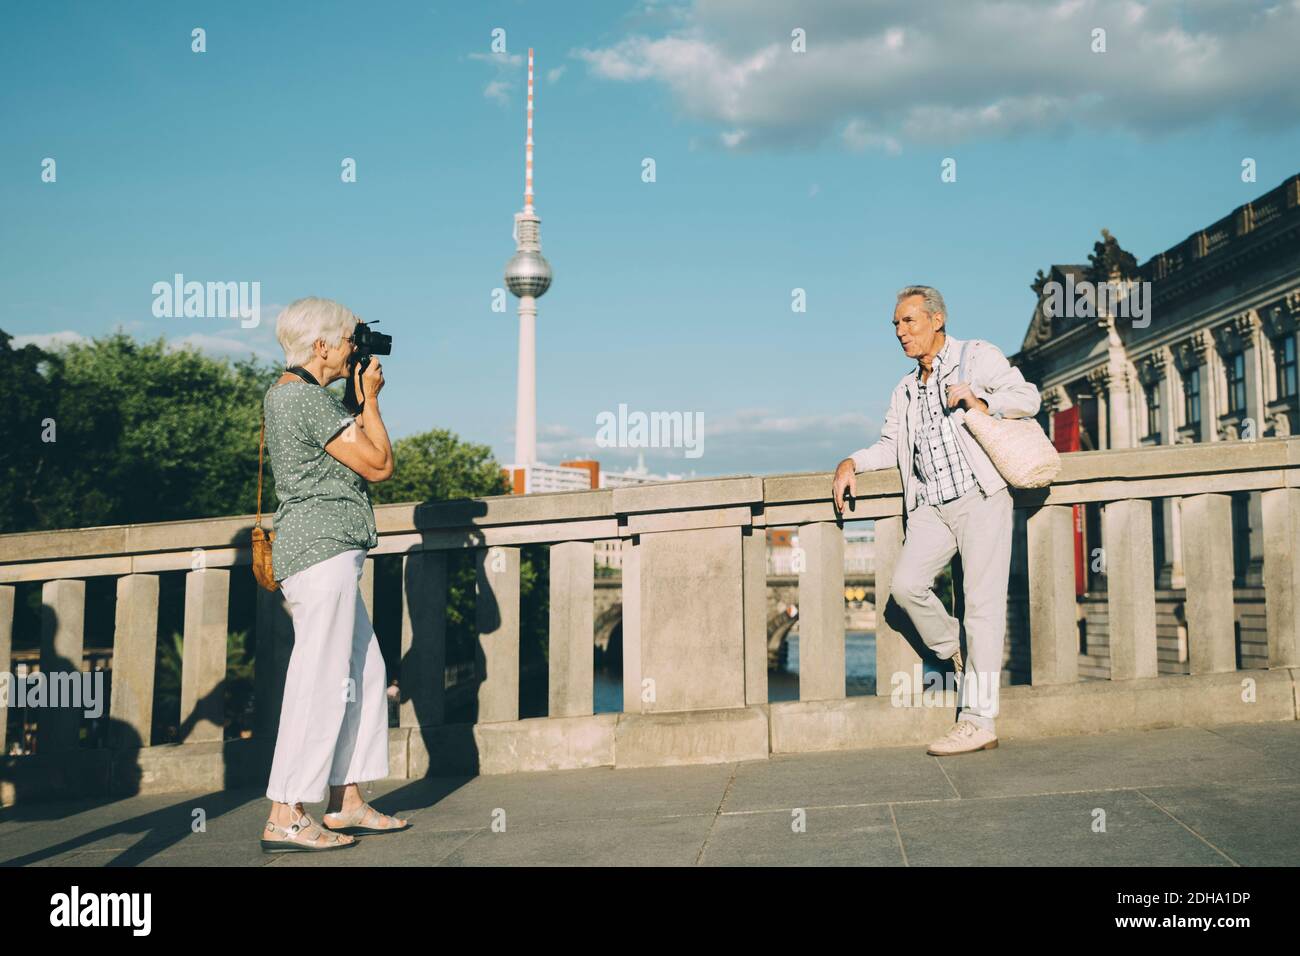 Full length of woman taking photograph of senior man while standing on bridge against tower in city Stock Photo